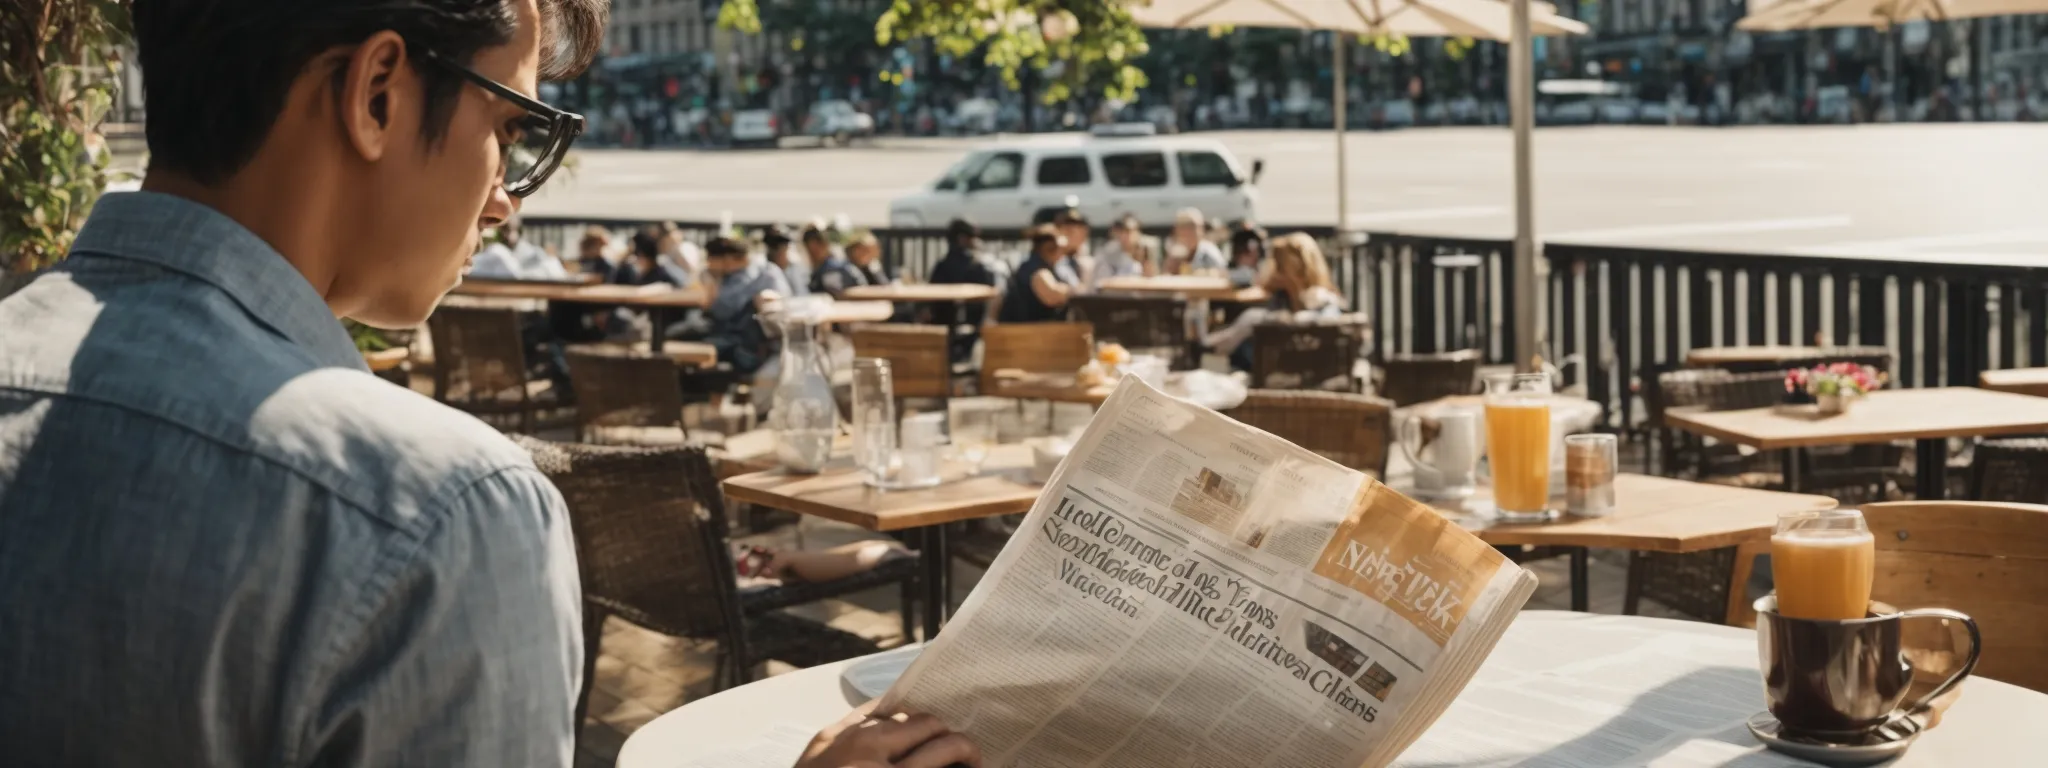 a person casually reading the new york times at a sunny cafe terrace, with various sections of the newspaper neatly spread out on the table.